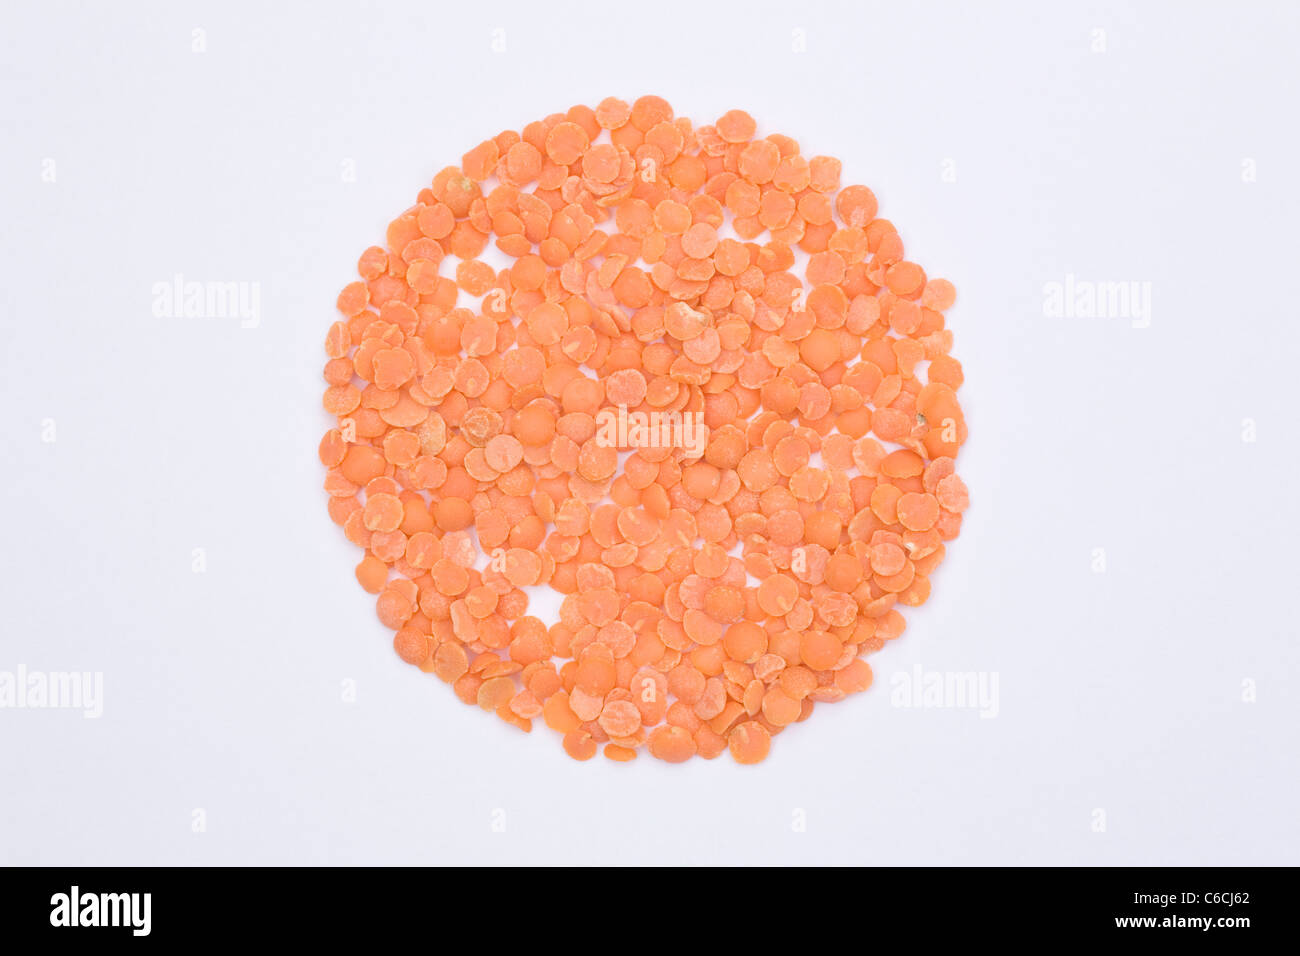 Lens culinaris. Red lentils on a white background. Stock Photo